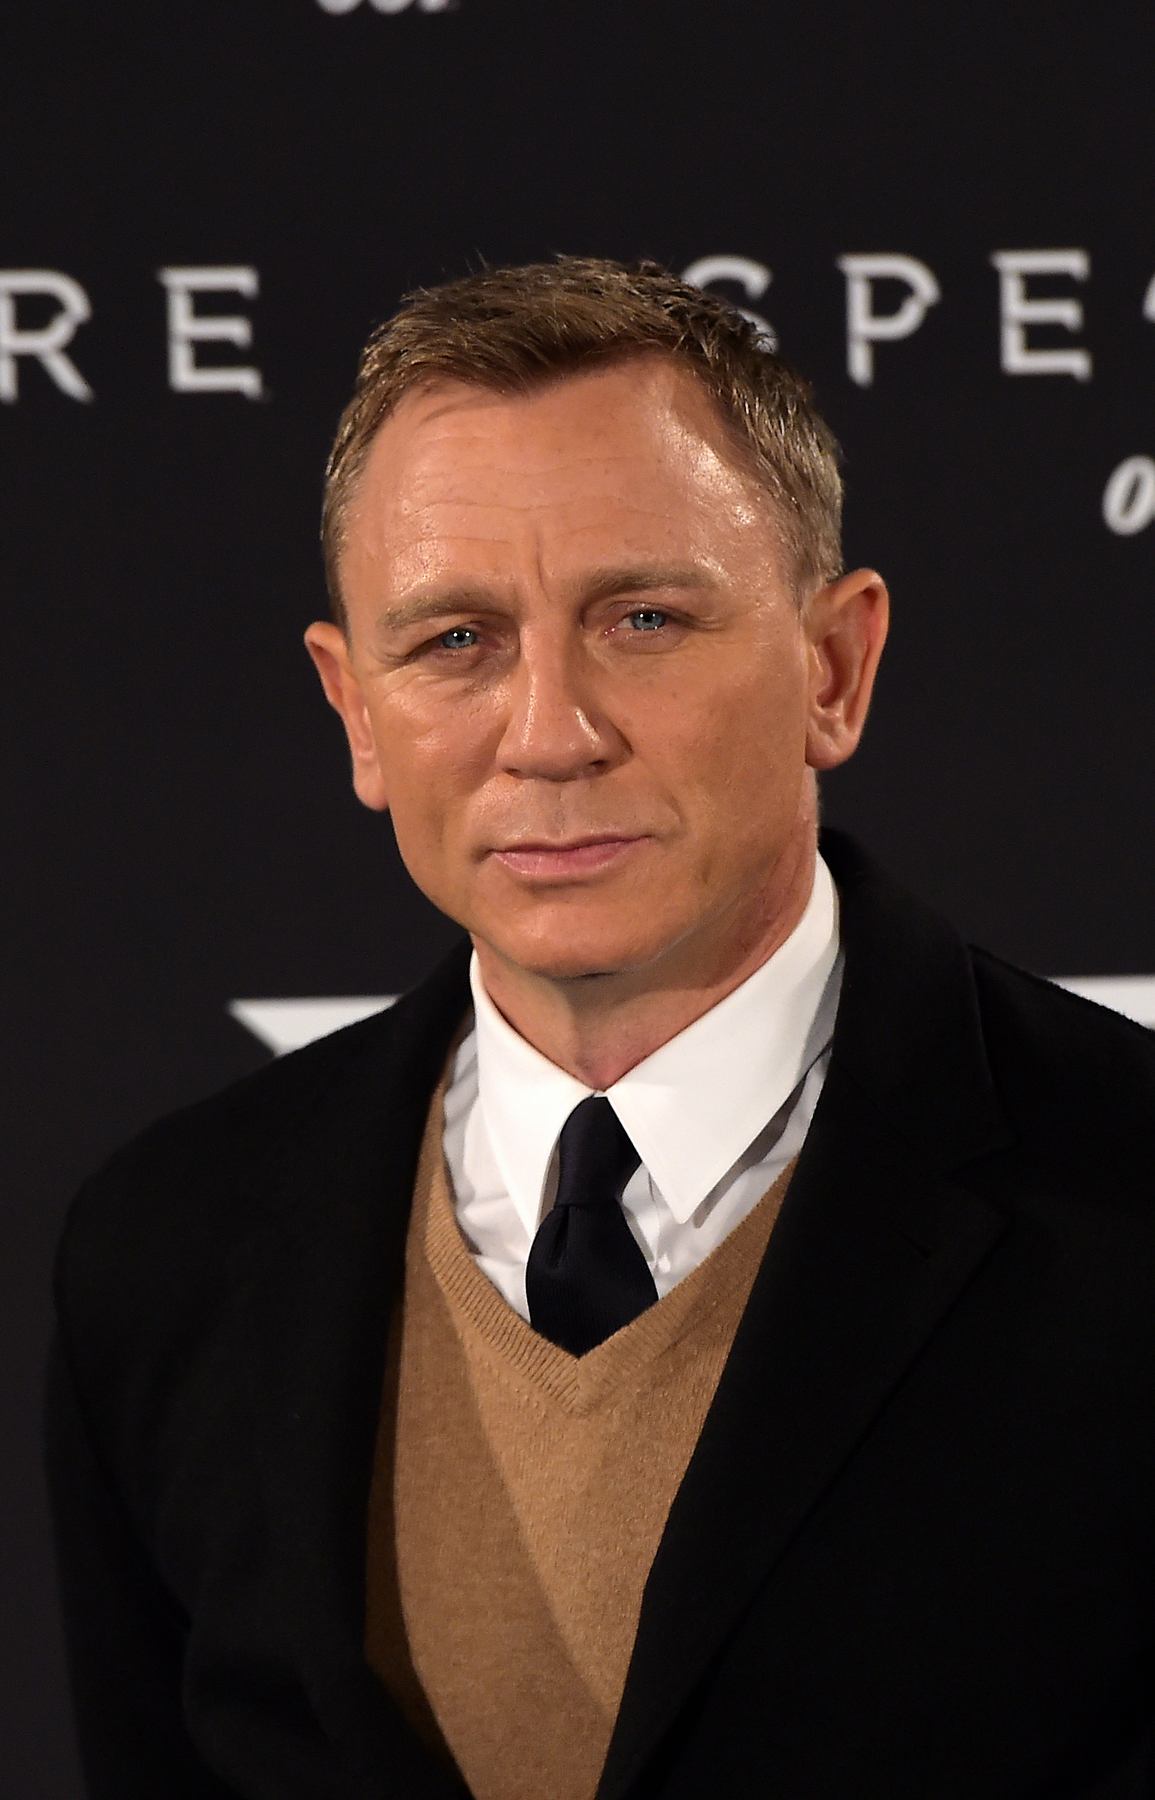 Daniel Craig with Monica Bellucci, Christoph Waltz and Sam Mendes at Spectre Rome Premiere and Photocall